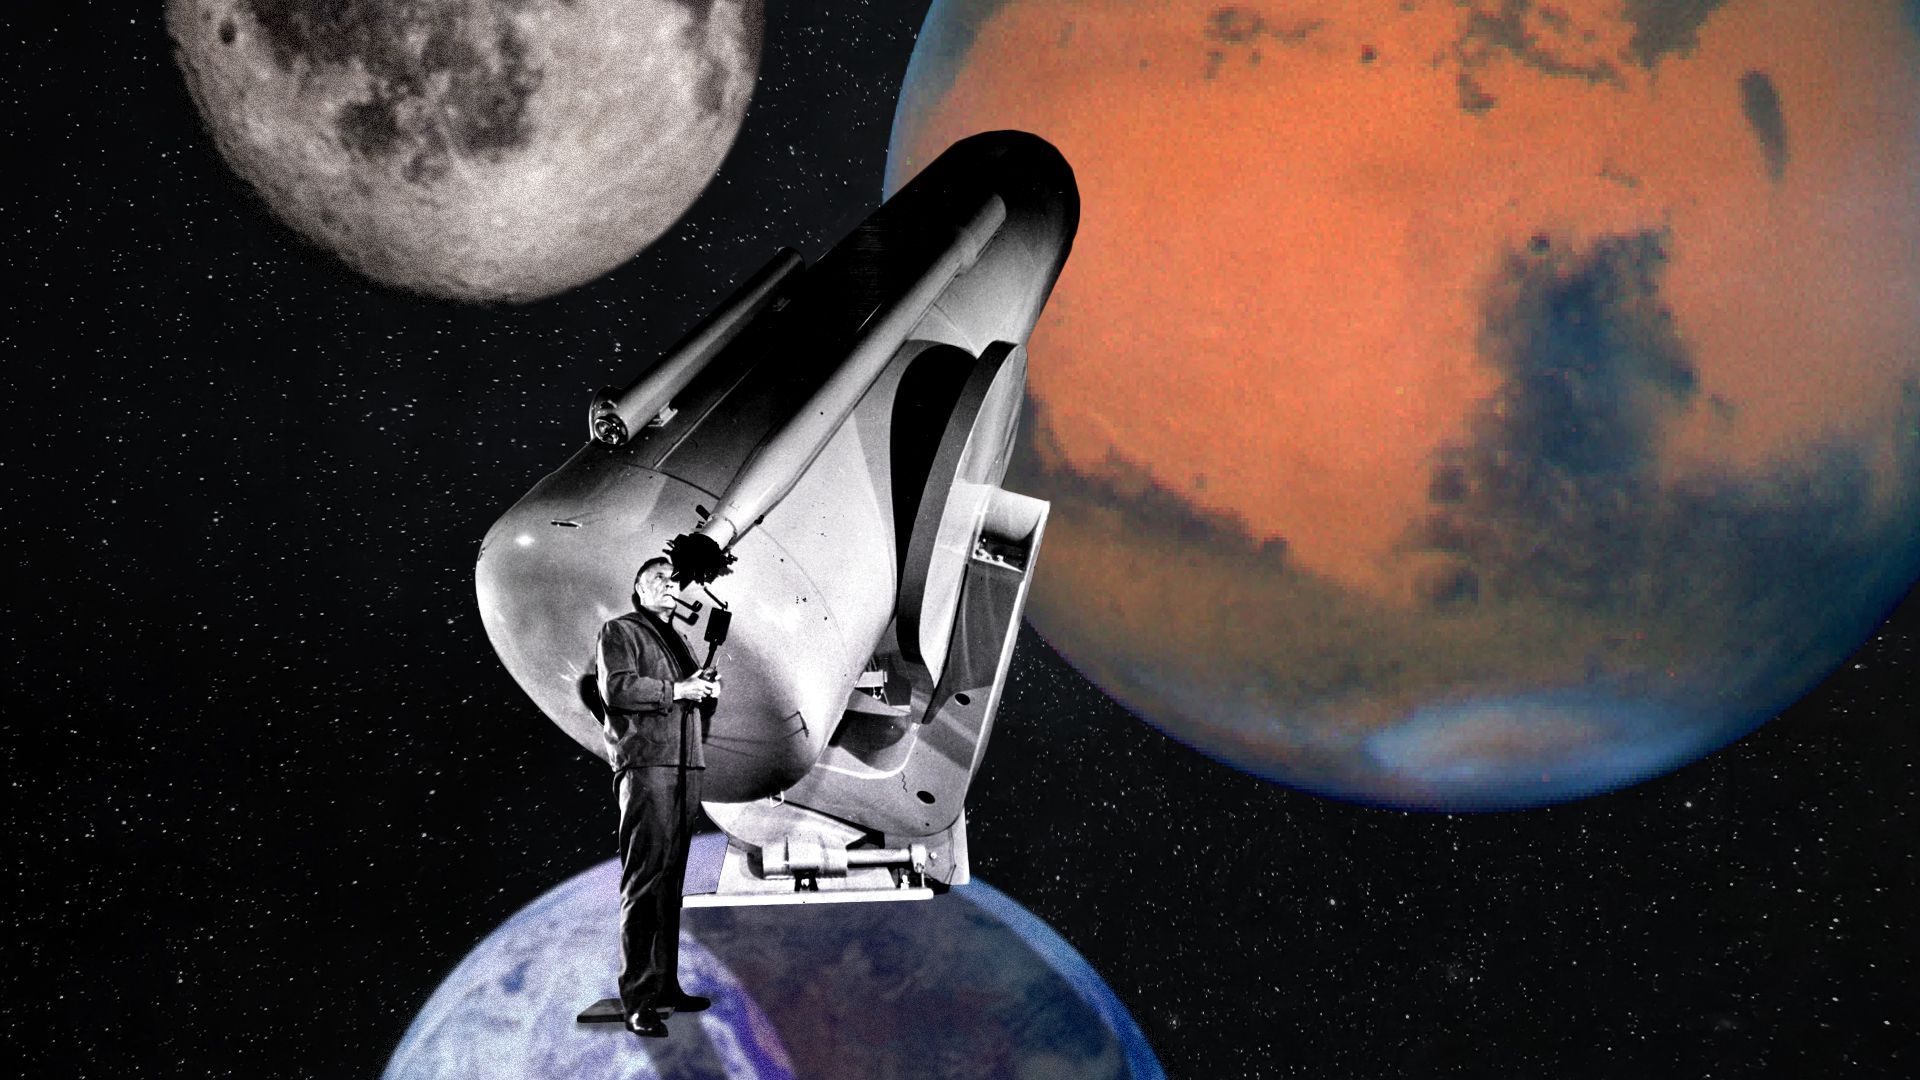 Photo illustration of Hubble looking through a telescope pointing towards Mars and the moon